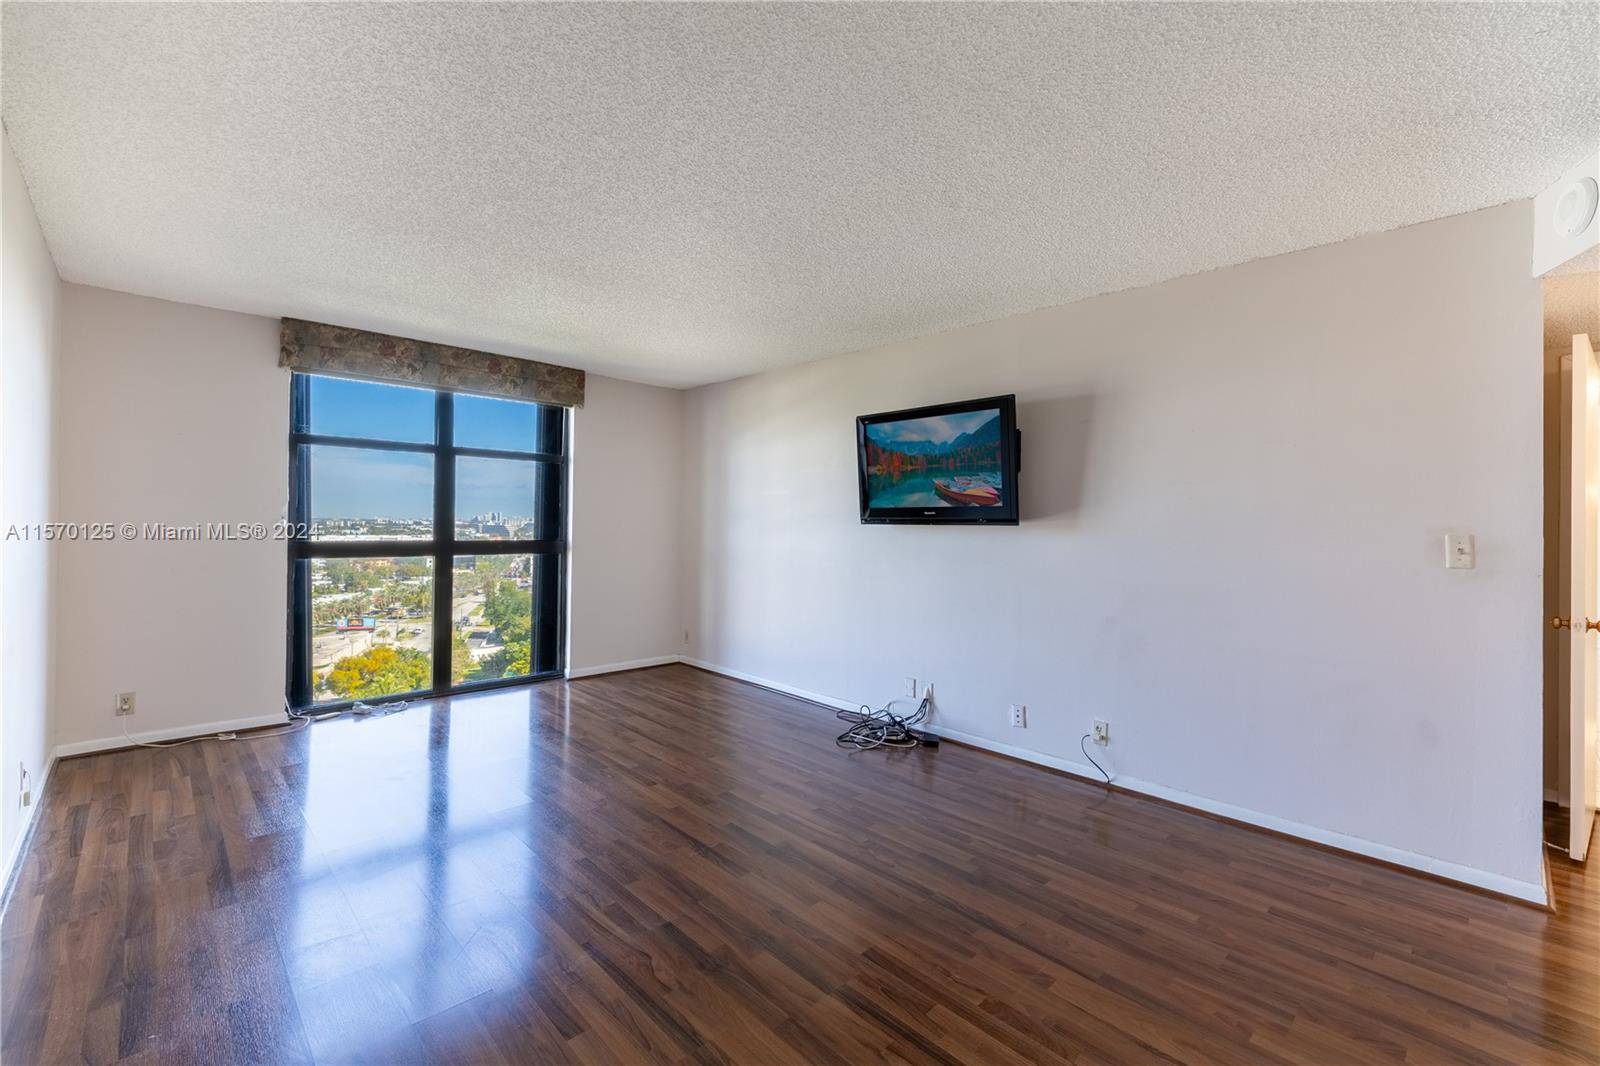 These 2 bedrooms and 2 bathrooms offer breathtaking views.